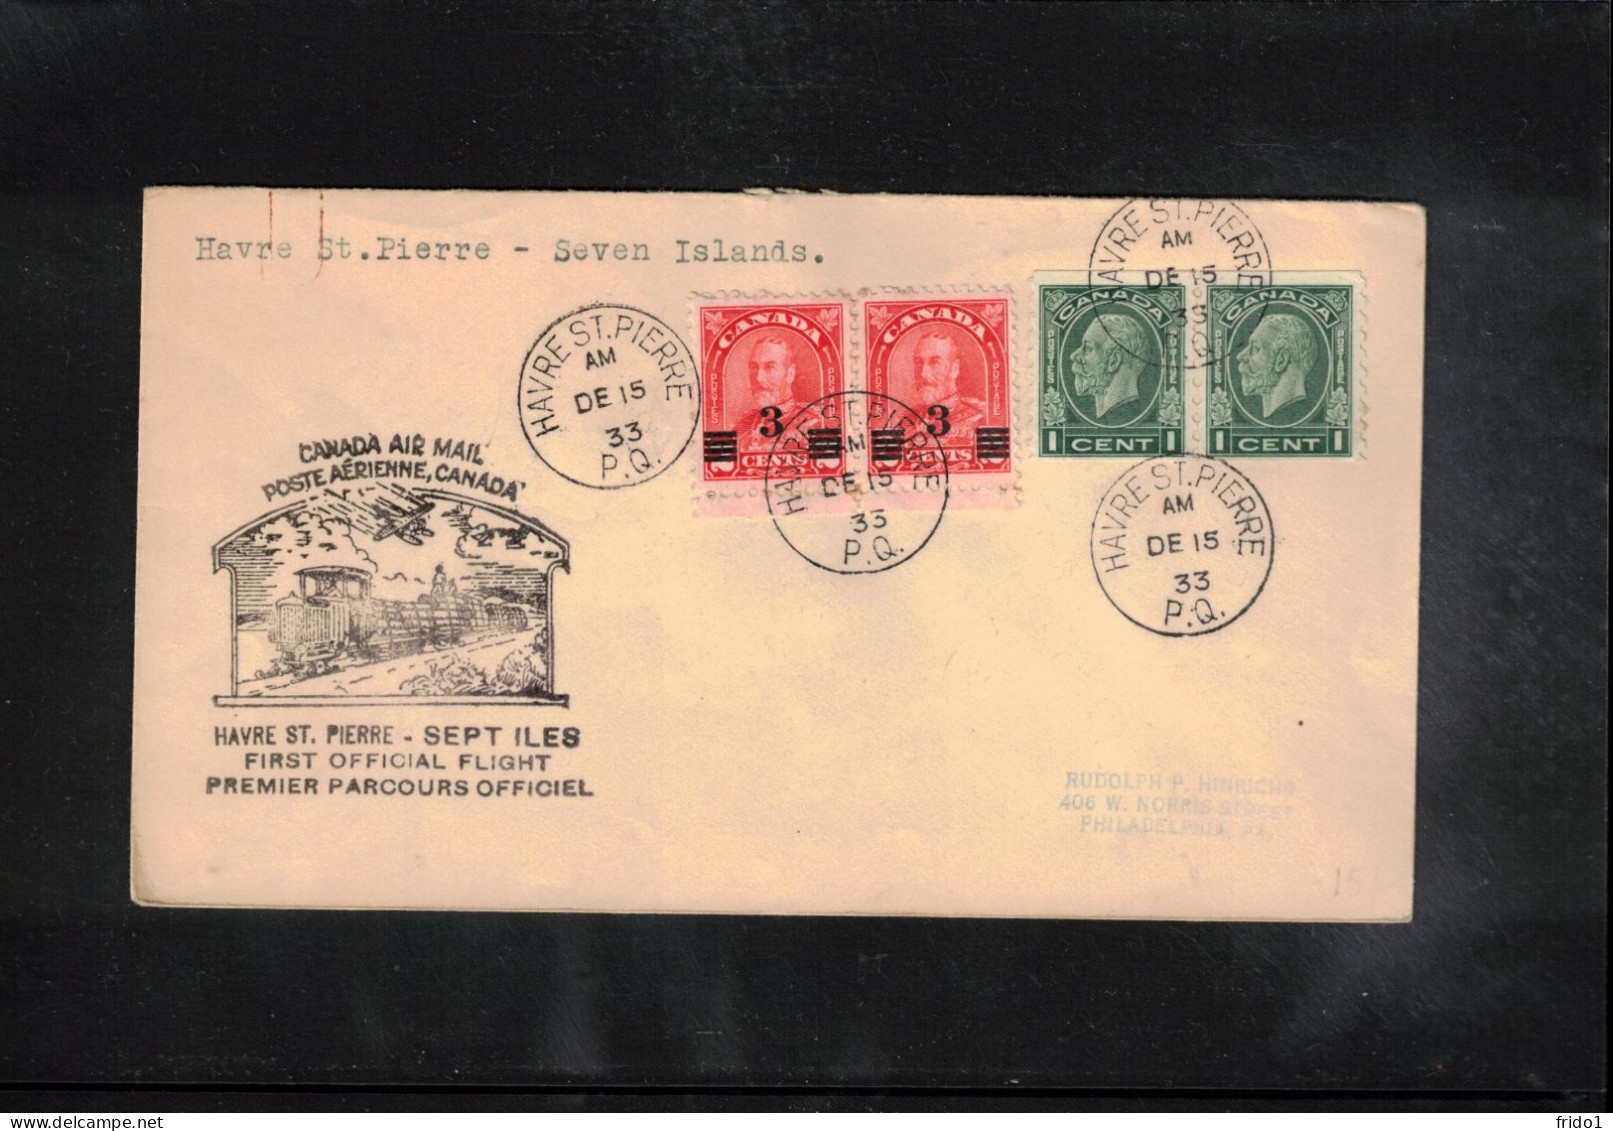 Canada 1933 Canada Air Mail - First Official Flight Havre St.Pierre - Seven Islands - First Flight Covers